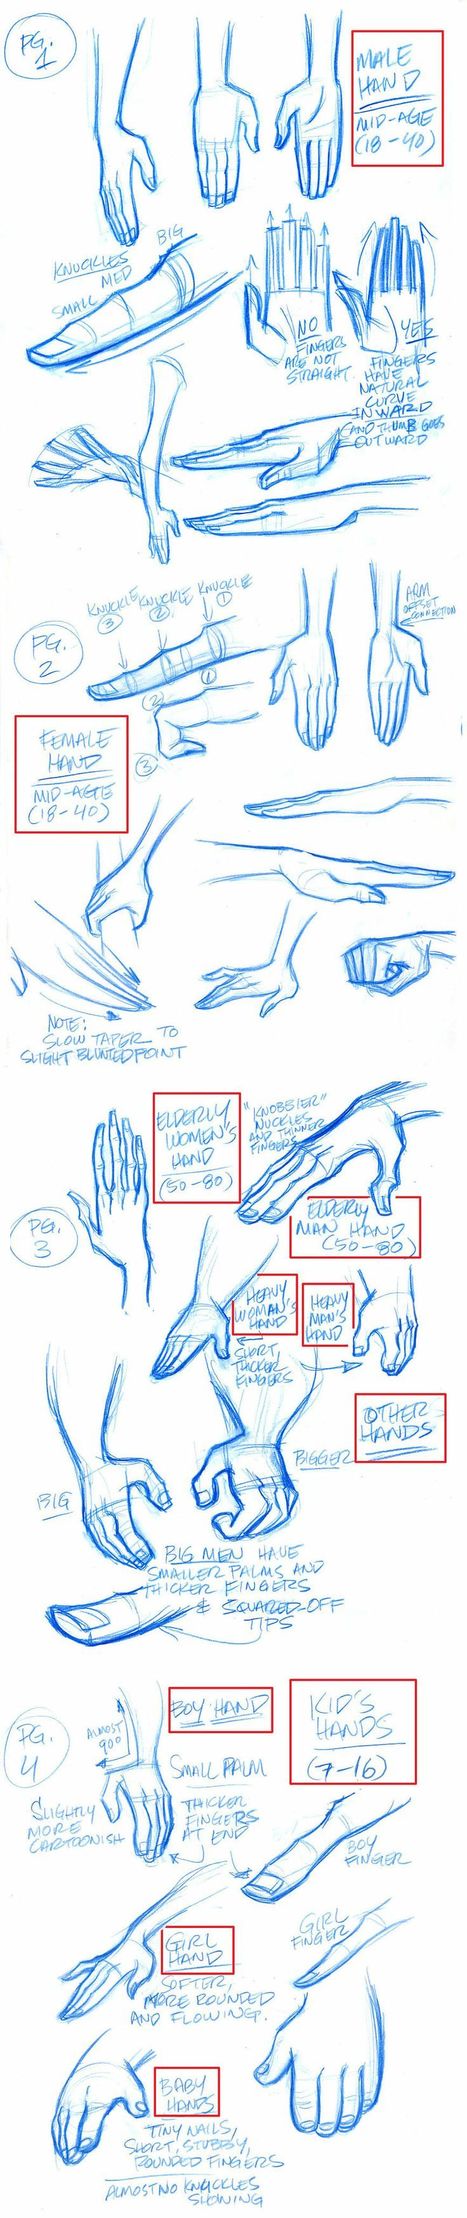 Hand Anatomy Reference Guide | Drawing References and Resources | Scoop.it